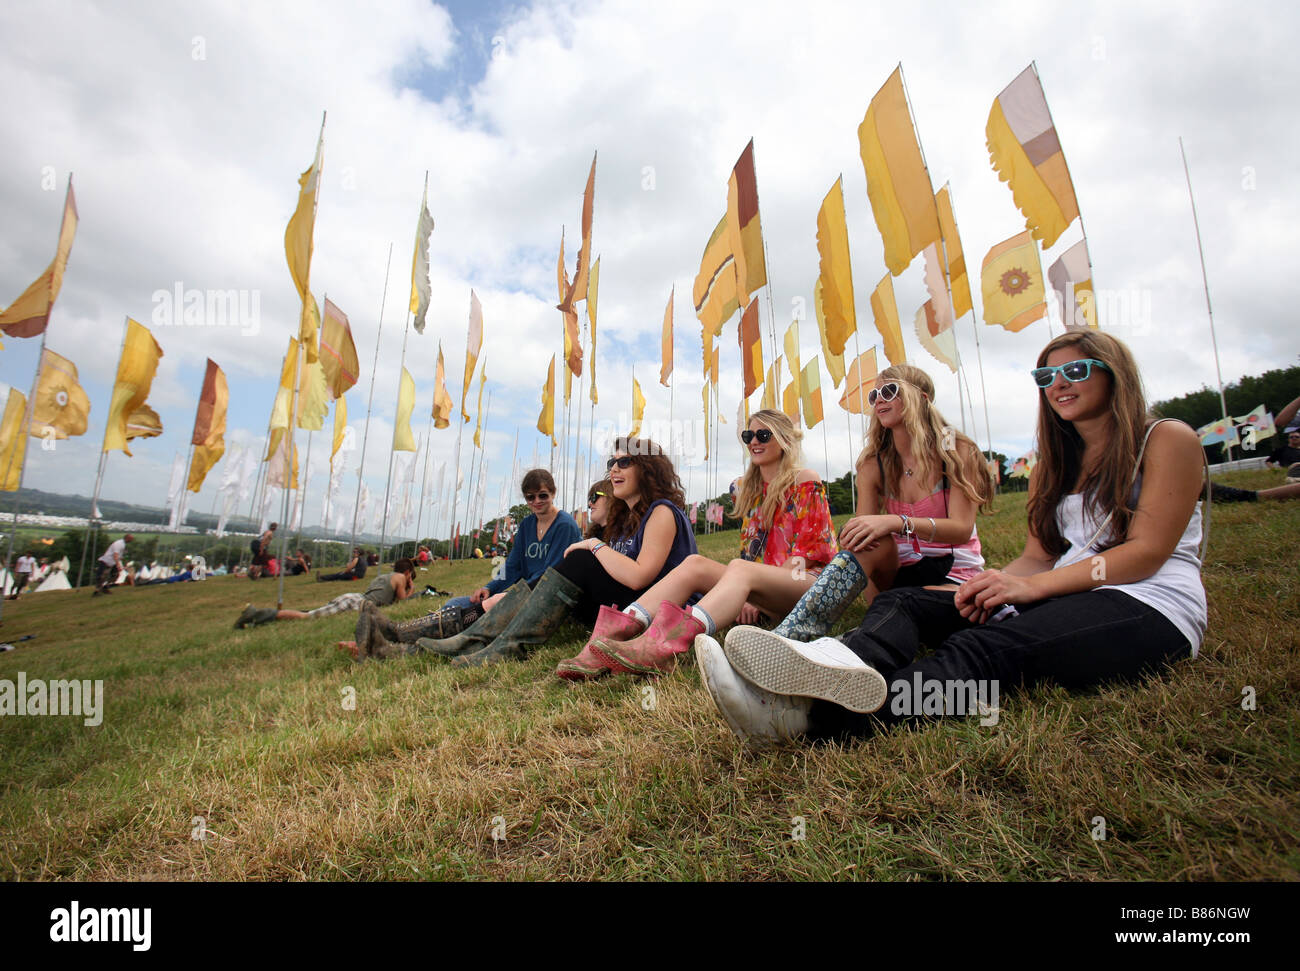 A group of girls enjoy the sunshine sat among flags at the Glastonbury Festival in Pilton, Somerset in the UK. Stock Photo